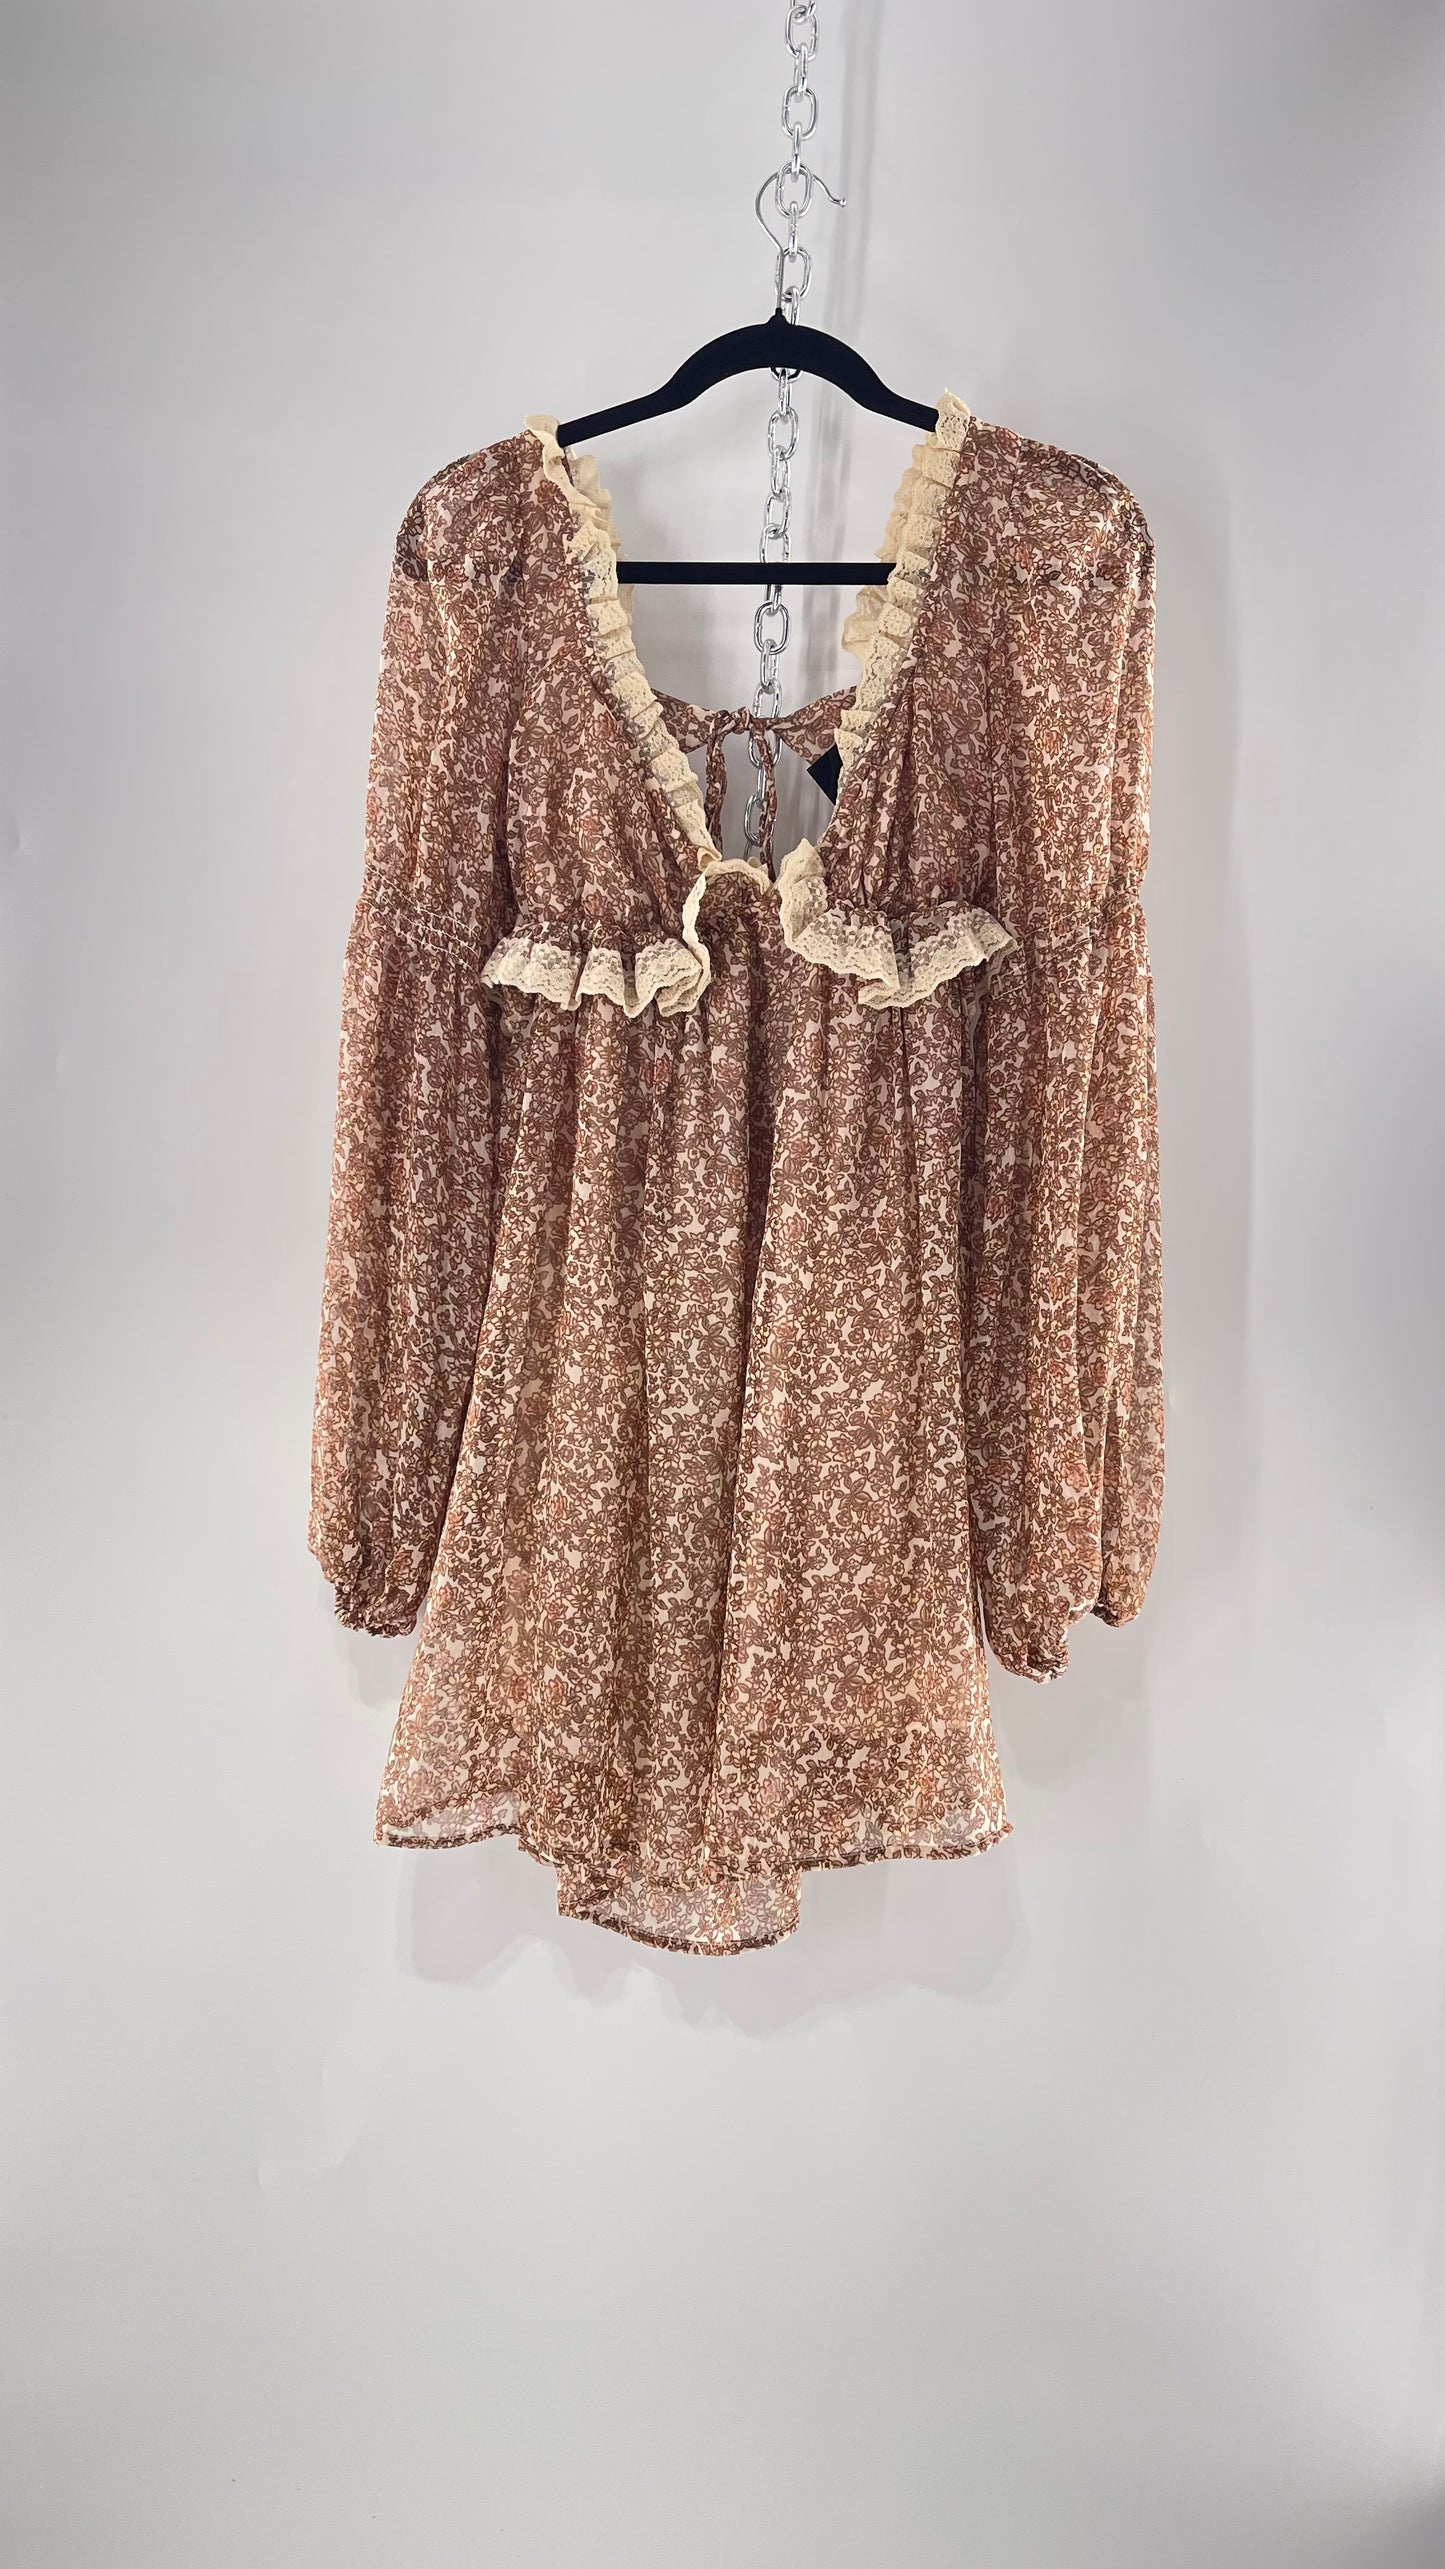 Free People Brown Floral Mini Dress with Beige Lace Lining and Puffy Balloon Sleeves (XS)